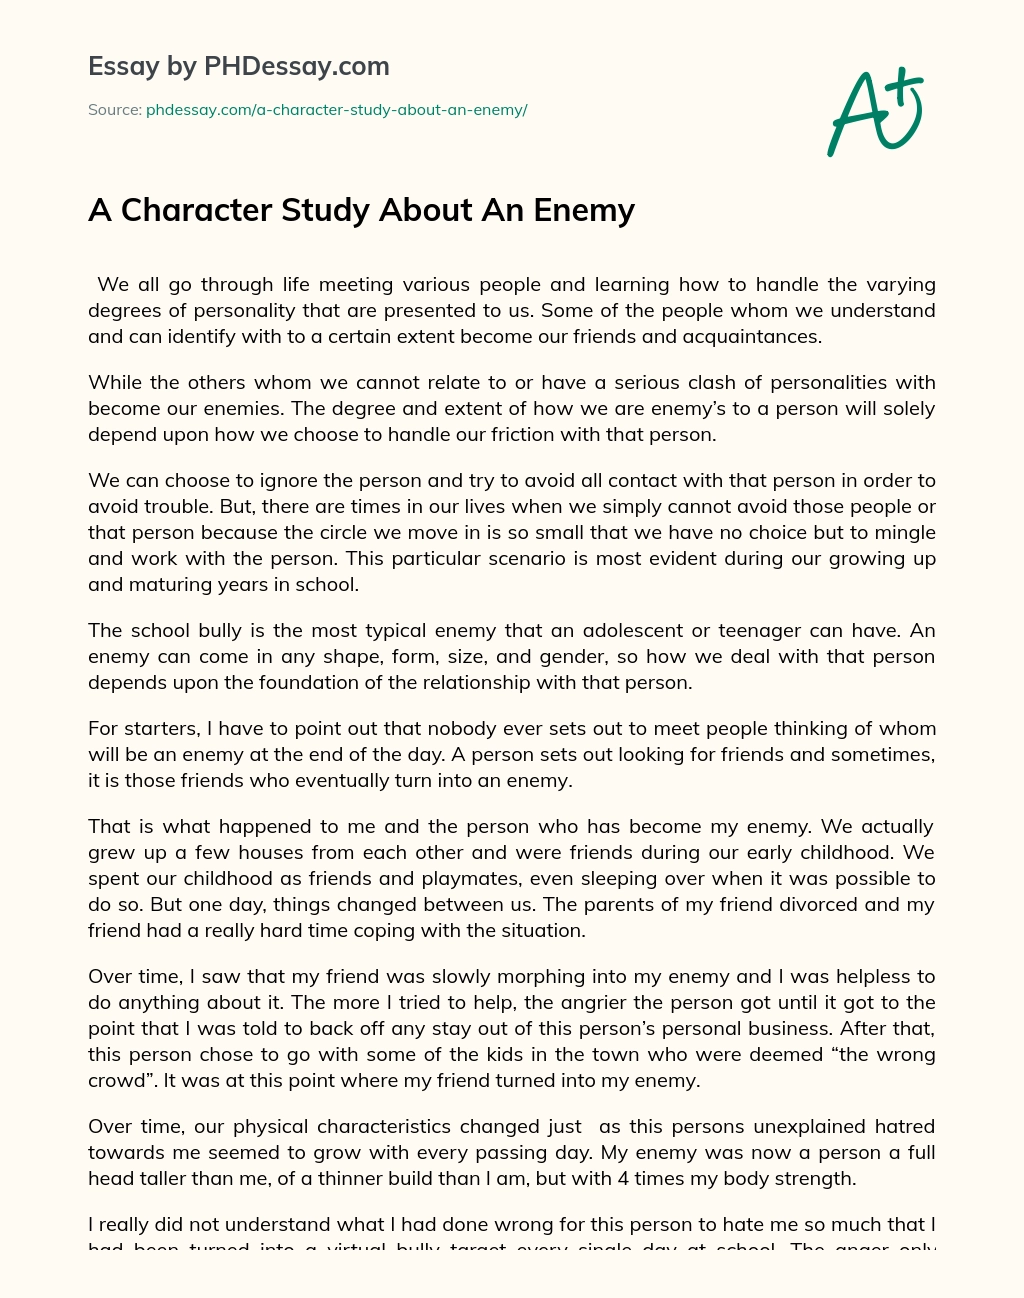 A Character Study About An Enemy essay